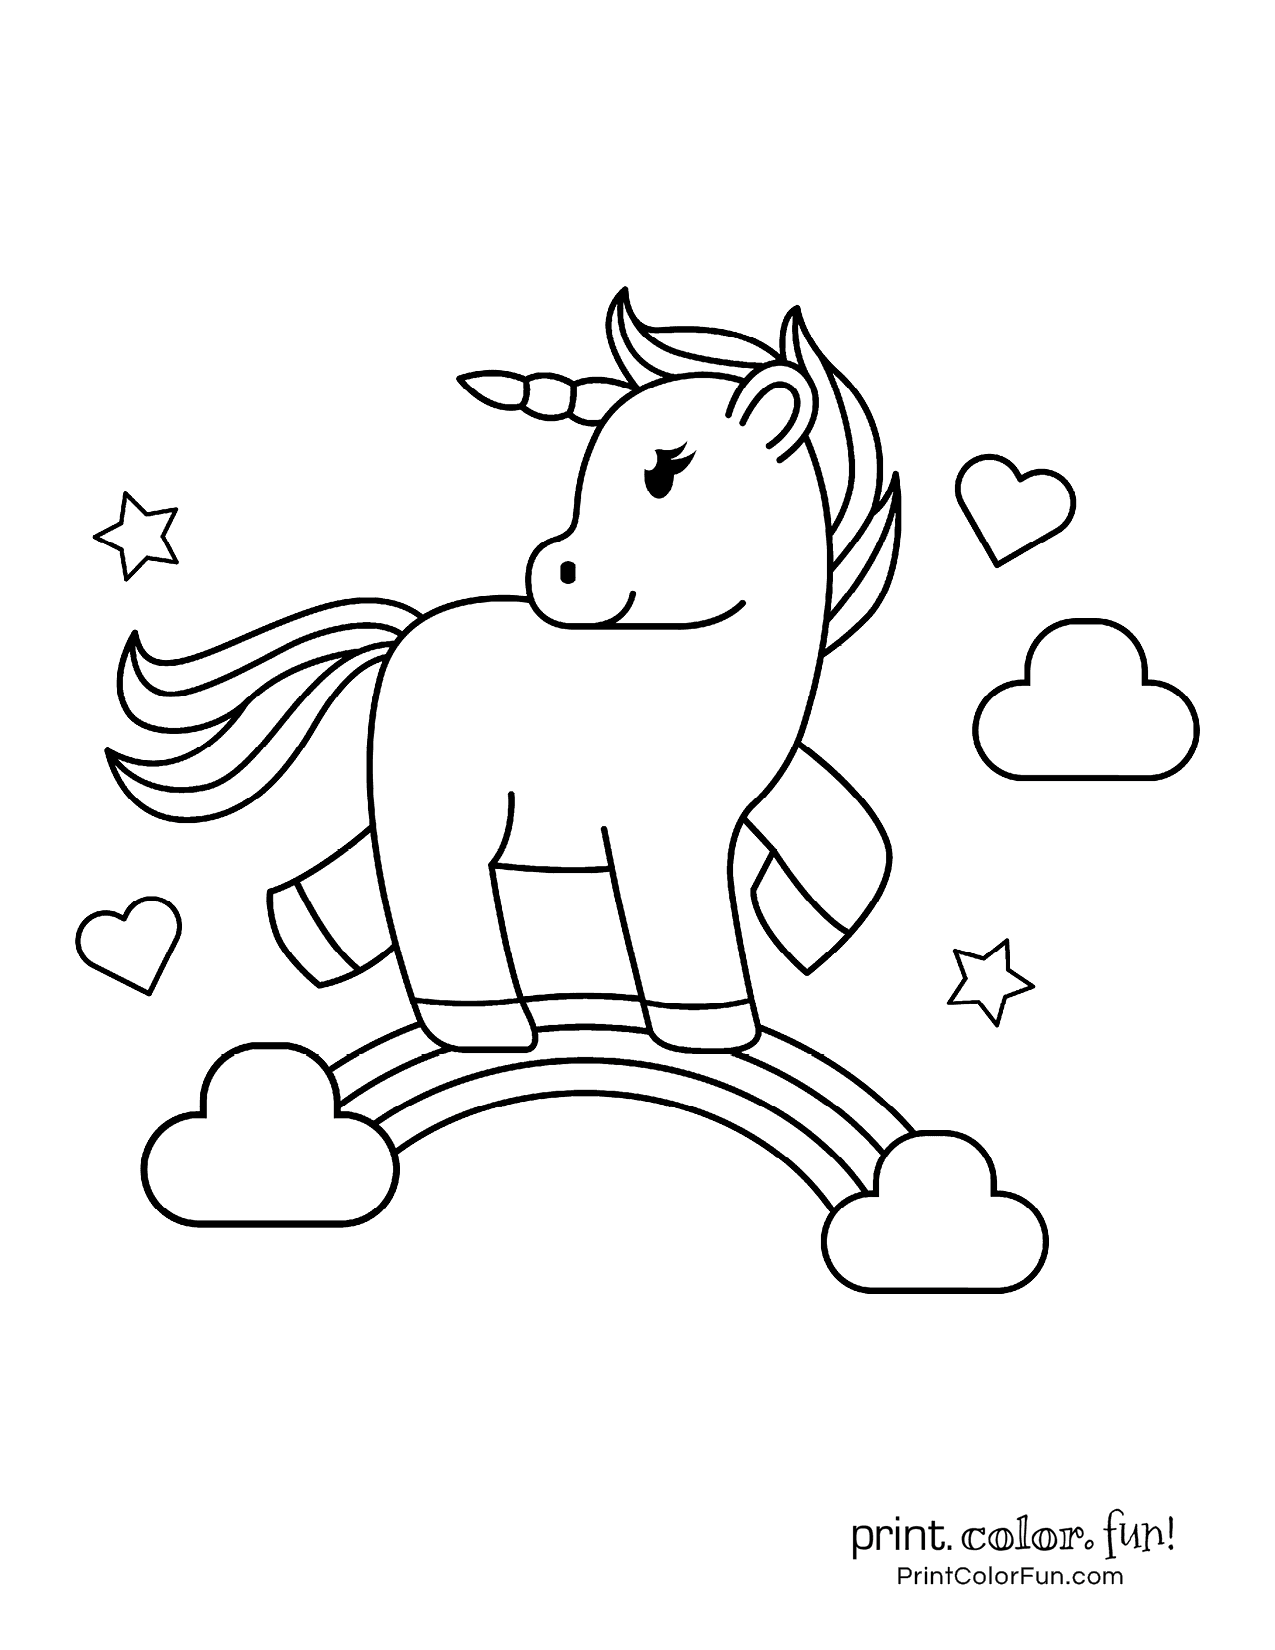 Cute My Little Unicorn: 5 different coloring pages to print coloring page - Print. Color. Fun!